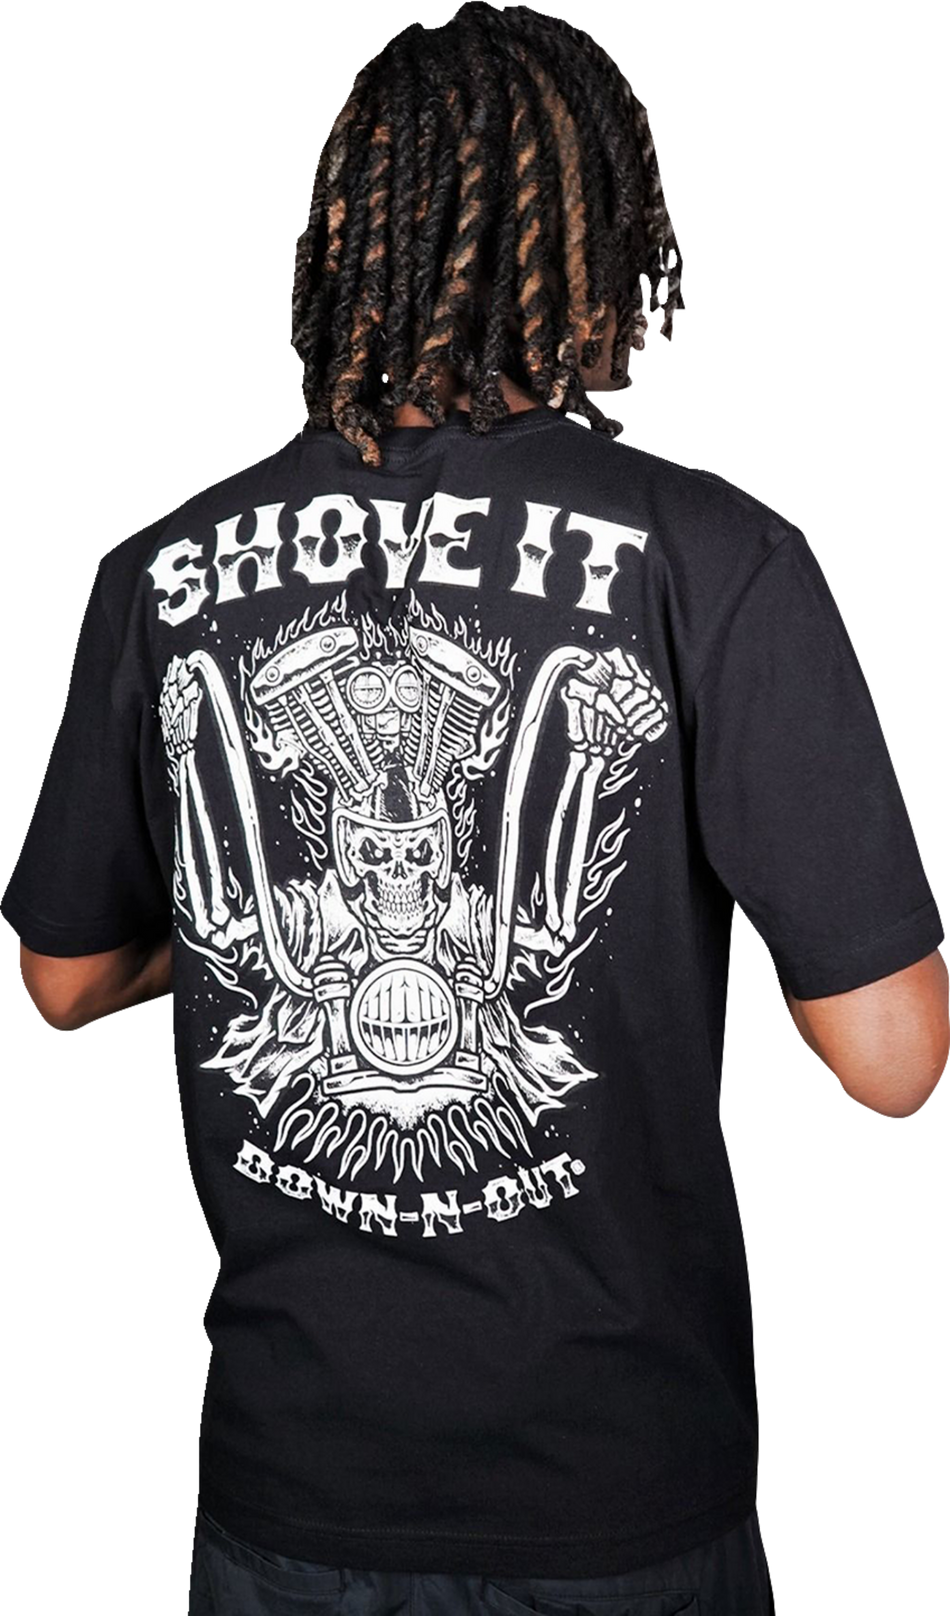 LETHAL THREAT Down-N-Out Shove It T-Shirt - Black - Small DT10046S